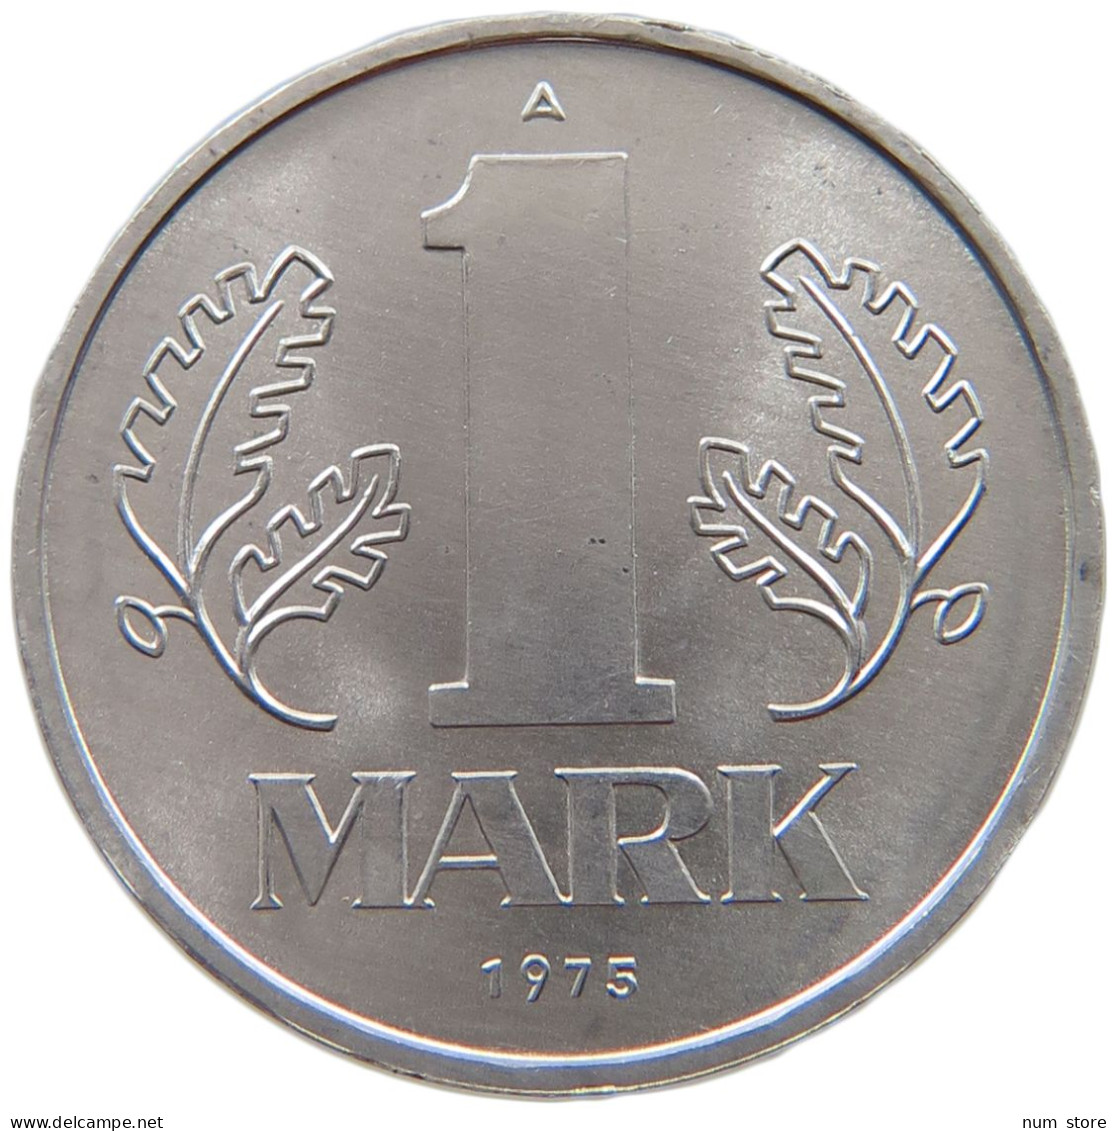 GERMANY DDR 1 MARK 1975 TOP #a076 0279 - 1 Marco